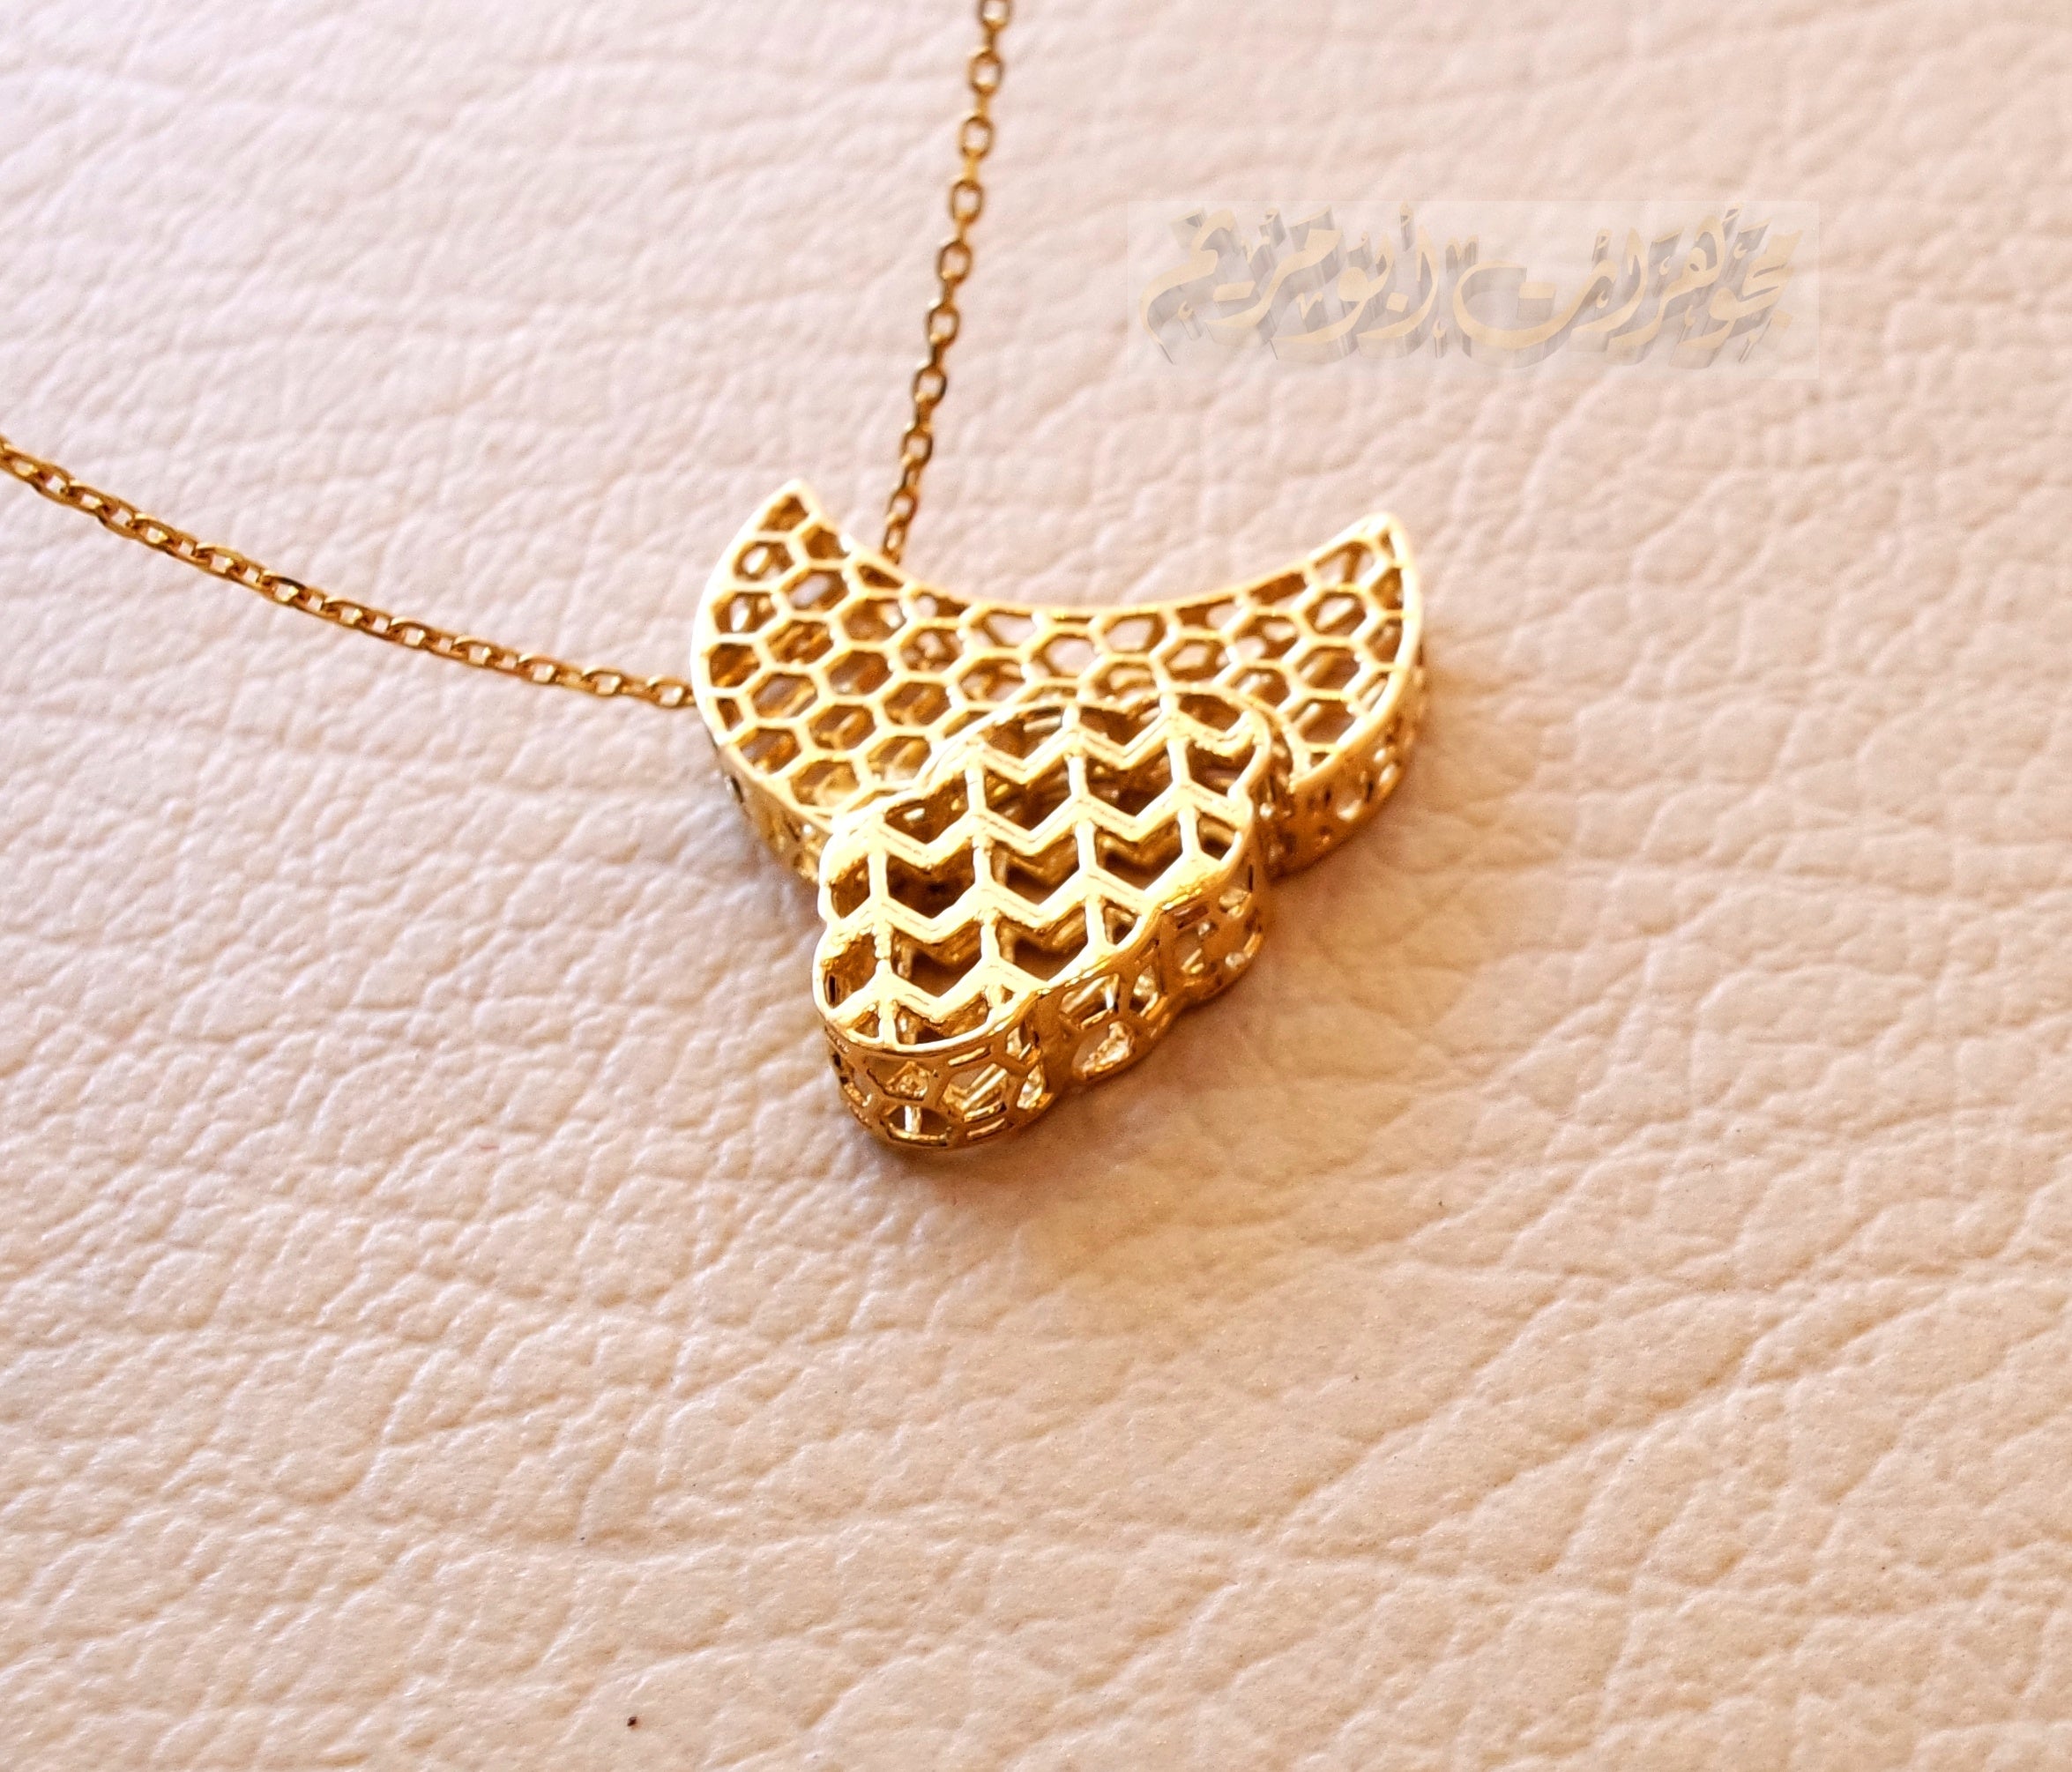 Honeycomb moon and cloud 3d 18K yellow gold necklace pendant and chain fine jewelry full insured shipping